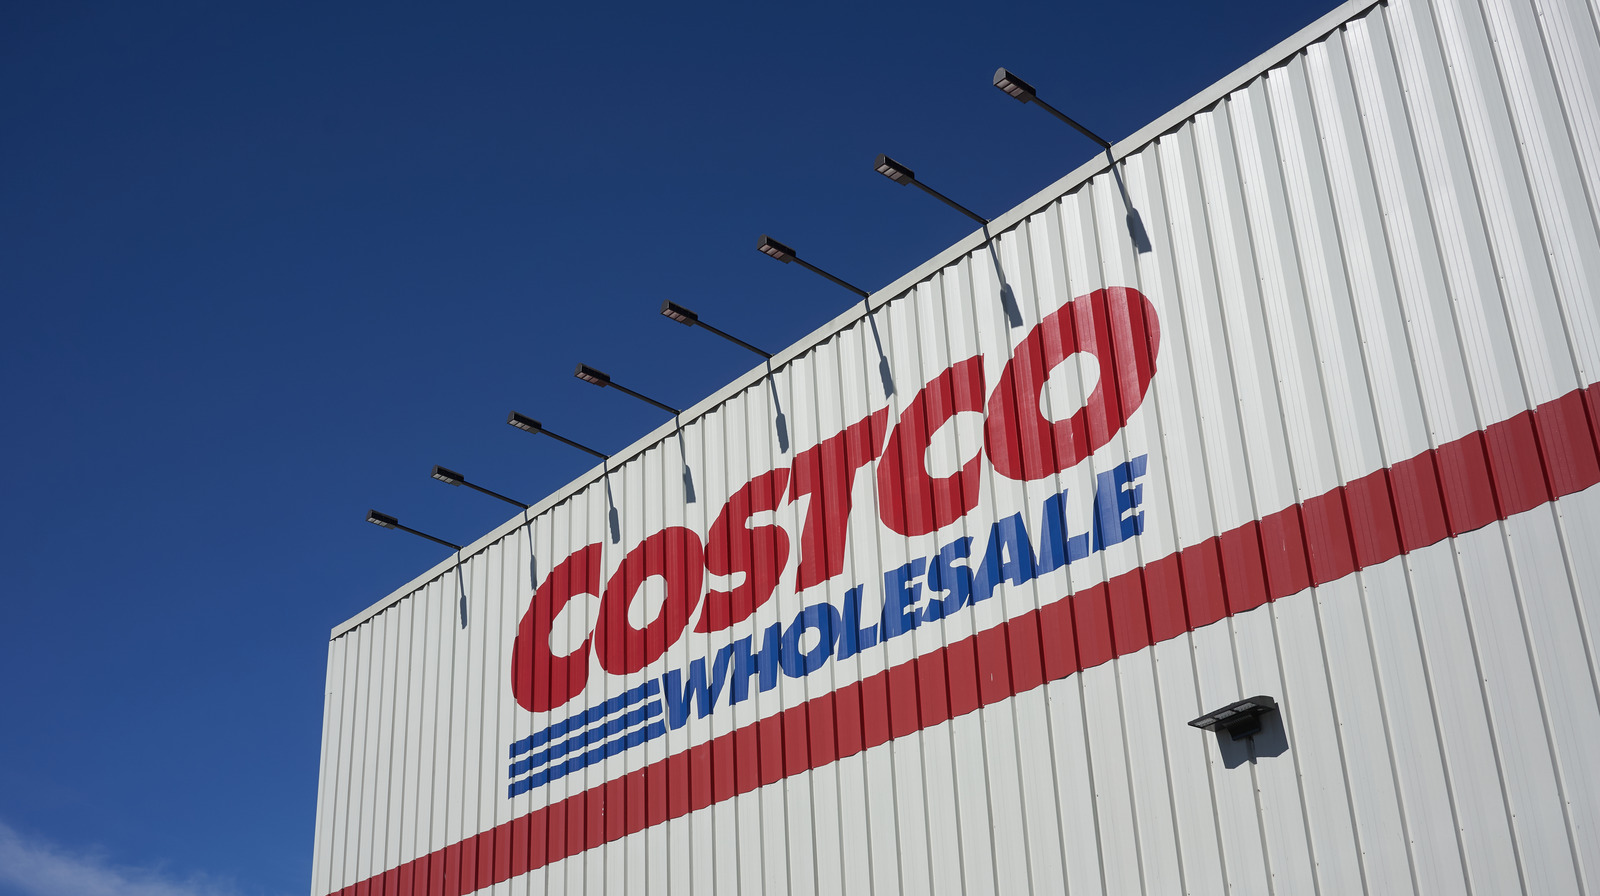 This Surprising Costco Product Is On Many Shopper #39 s #39 Top 5 #39 List